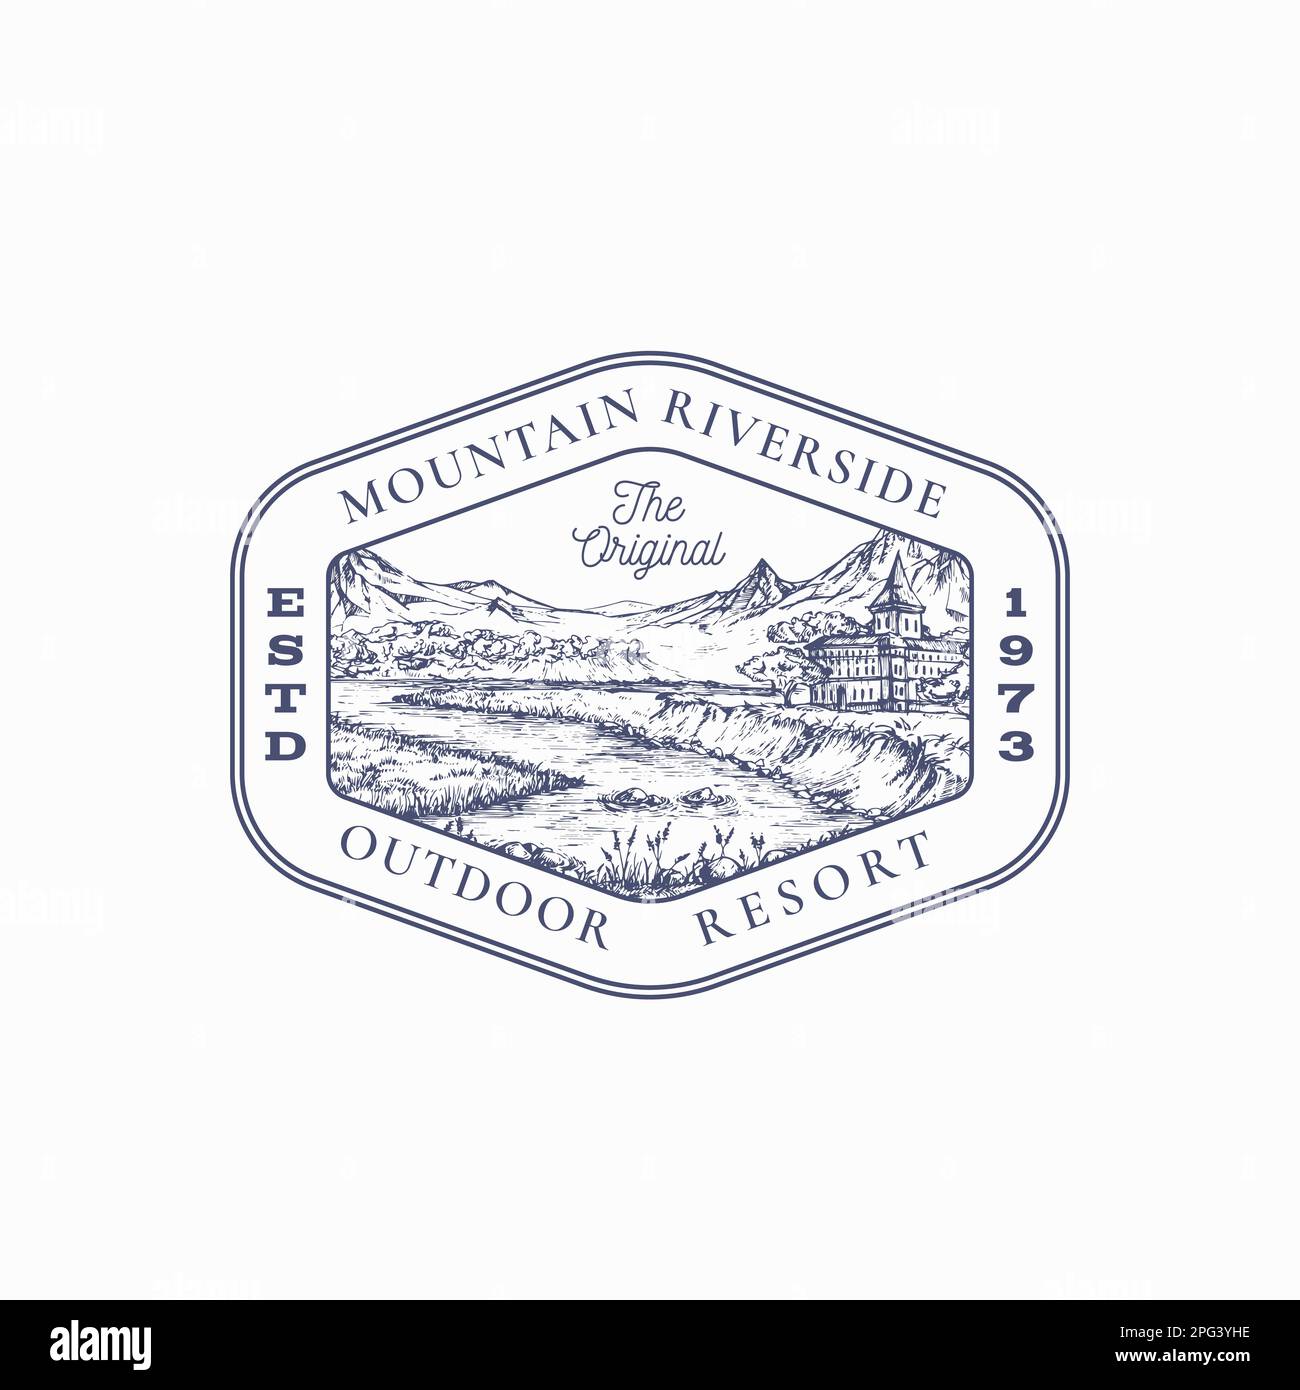 Outdoor Recreation Vacation Frame Badge Logo Template. Hand Drawn Mansion Building near River and Mountains Landscape Sketch with Retro Typography and Stock Vector